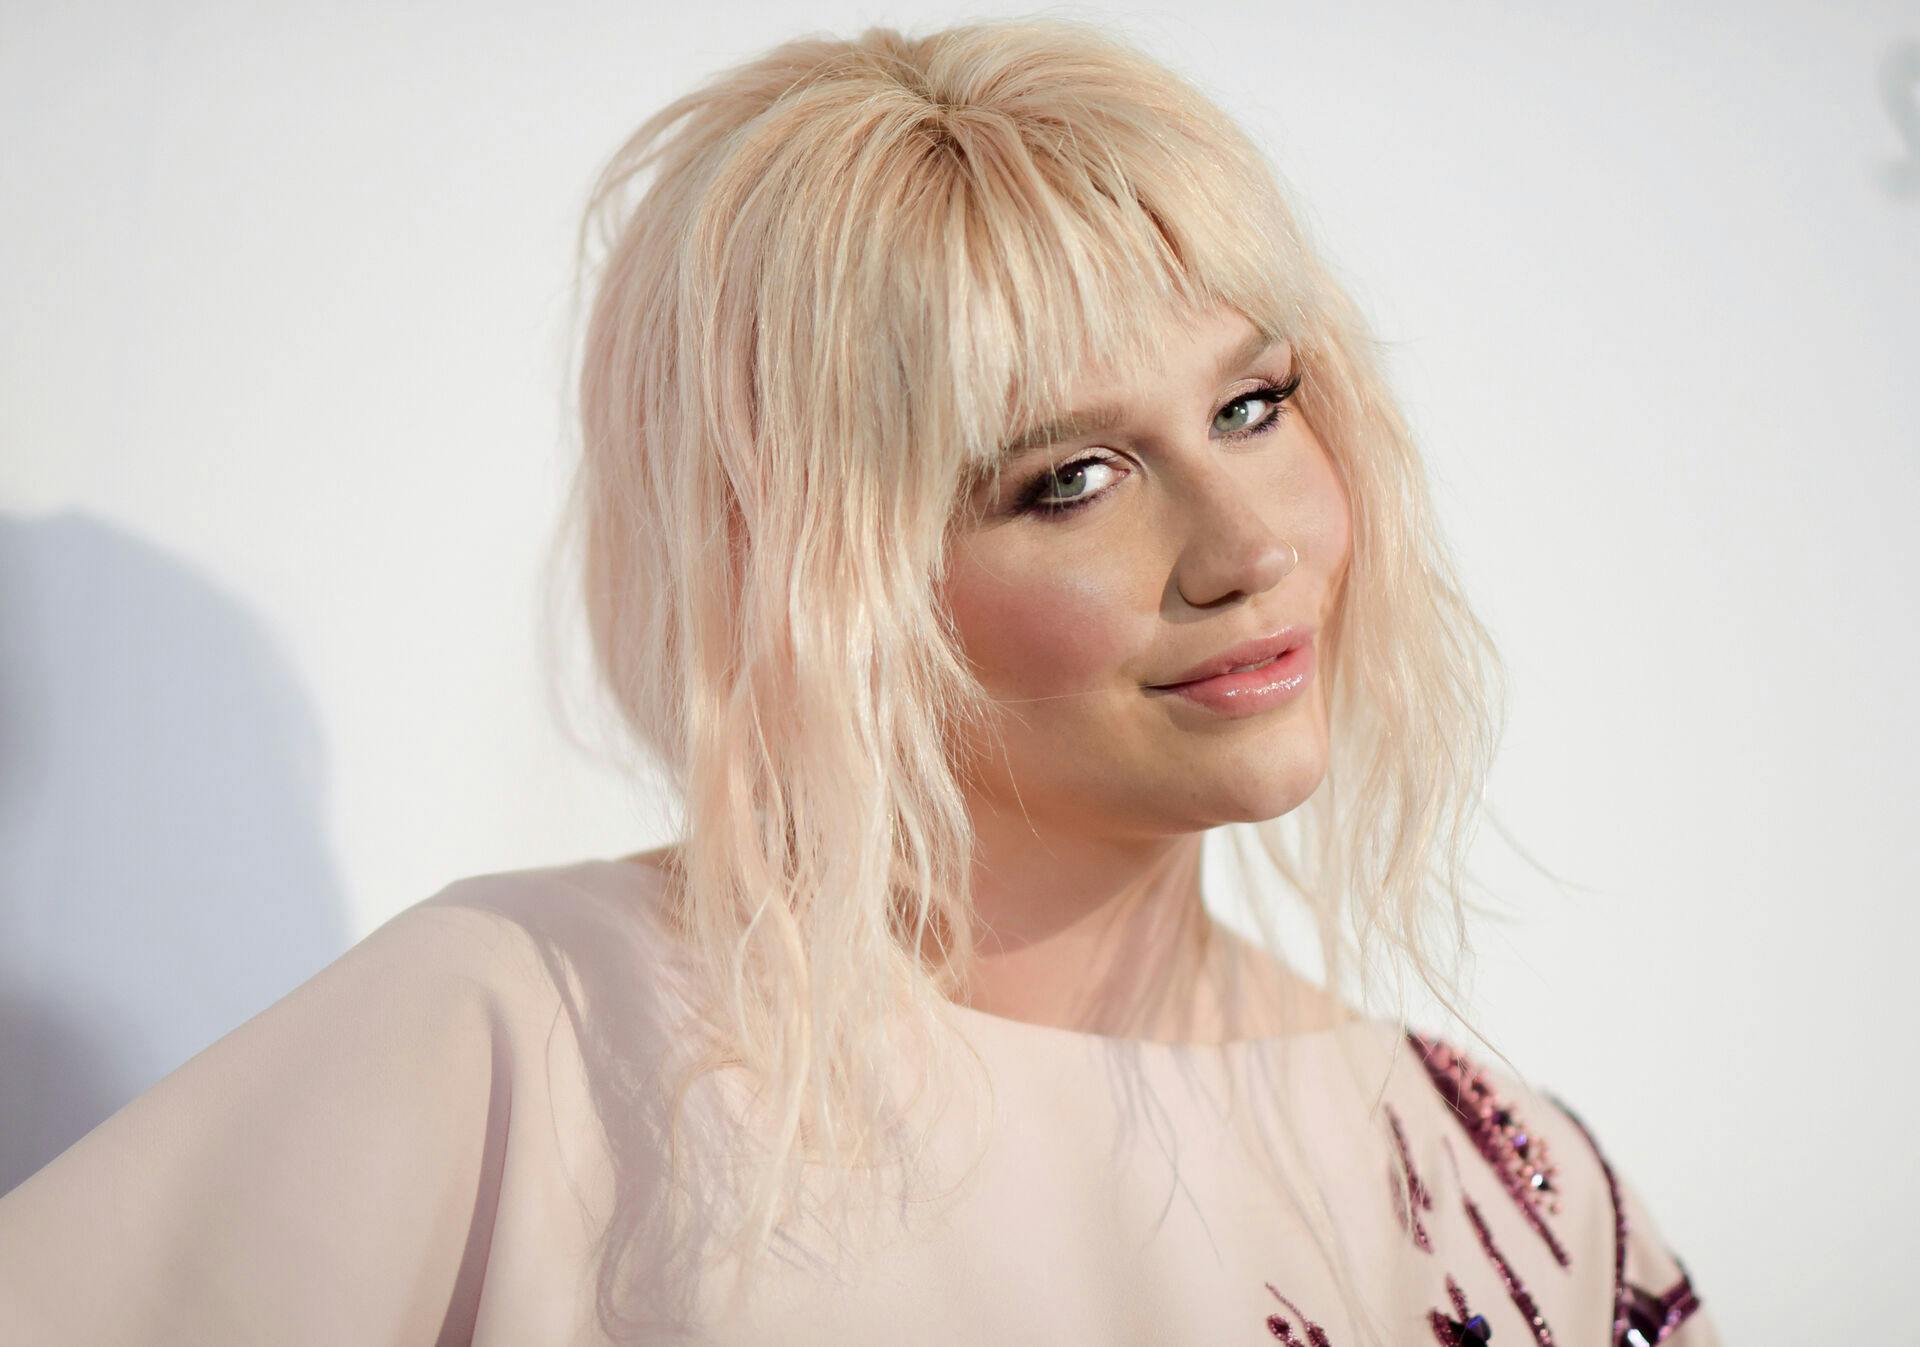 FILE - In this May 7, 2016 file photo, Kesha attends "To the Rescue: Saving Animal Lives" Gala and Fundraiser in Los Angeles. Dr. Luke and his record label say they are giving Kesha approval to perform at Sunday's Billboard Music Awards. His label, Kemosabe Records, said in a statement Thursday, May 19, 2016, that they are approving the performance after being reassured that Kesha was not going to use her time onstage to highlight their ongoing lawsuit. (Photo by Richard Shotwell/Invision/AP, File)